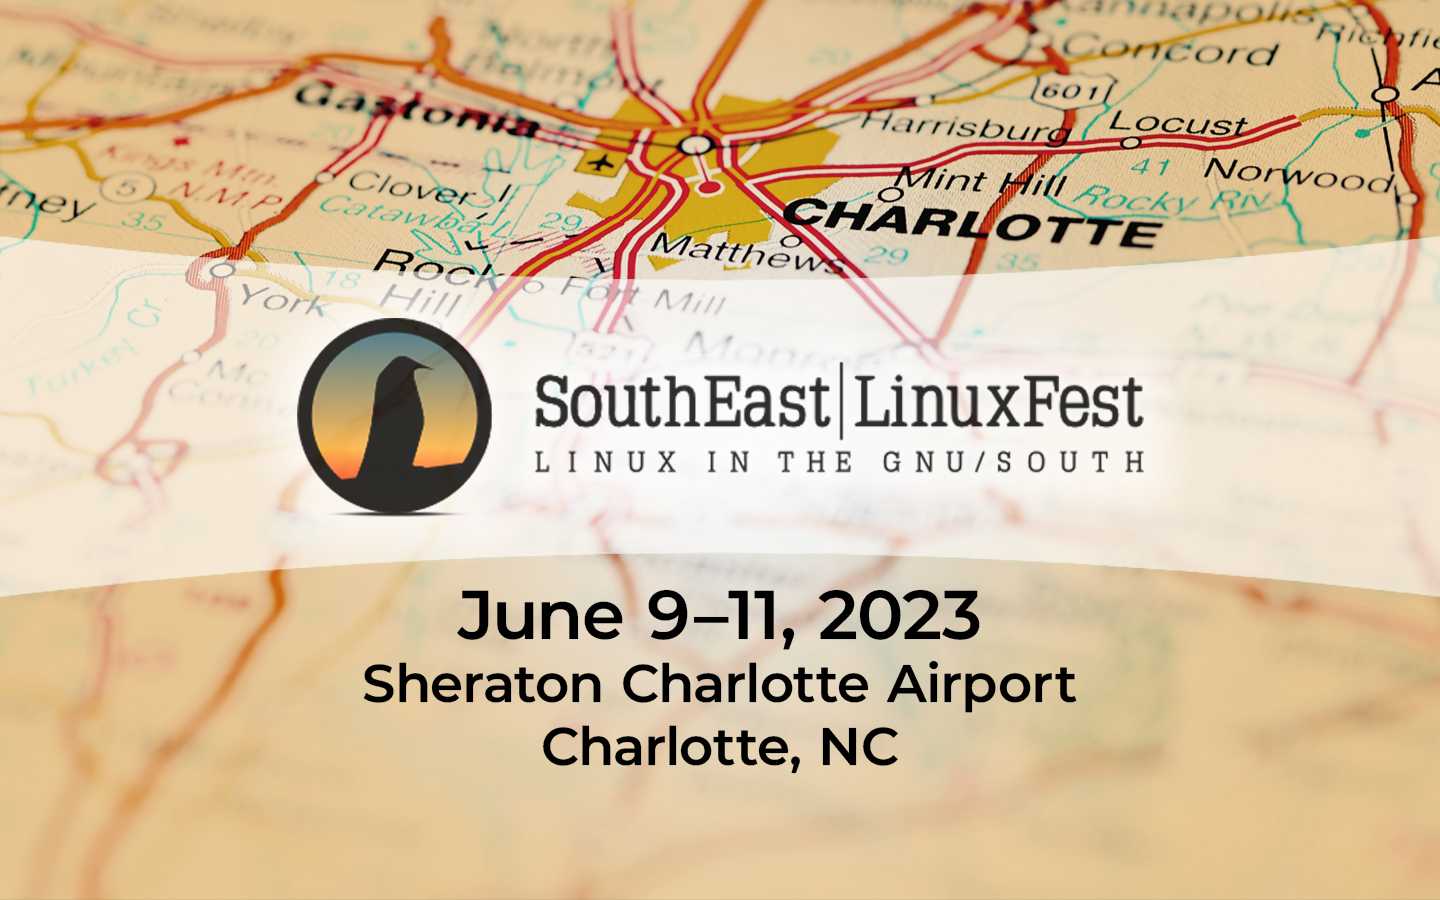 Mark Your Calendars for SouthEast LinuxFest, June 9-11